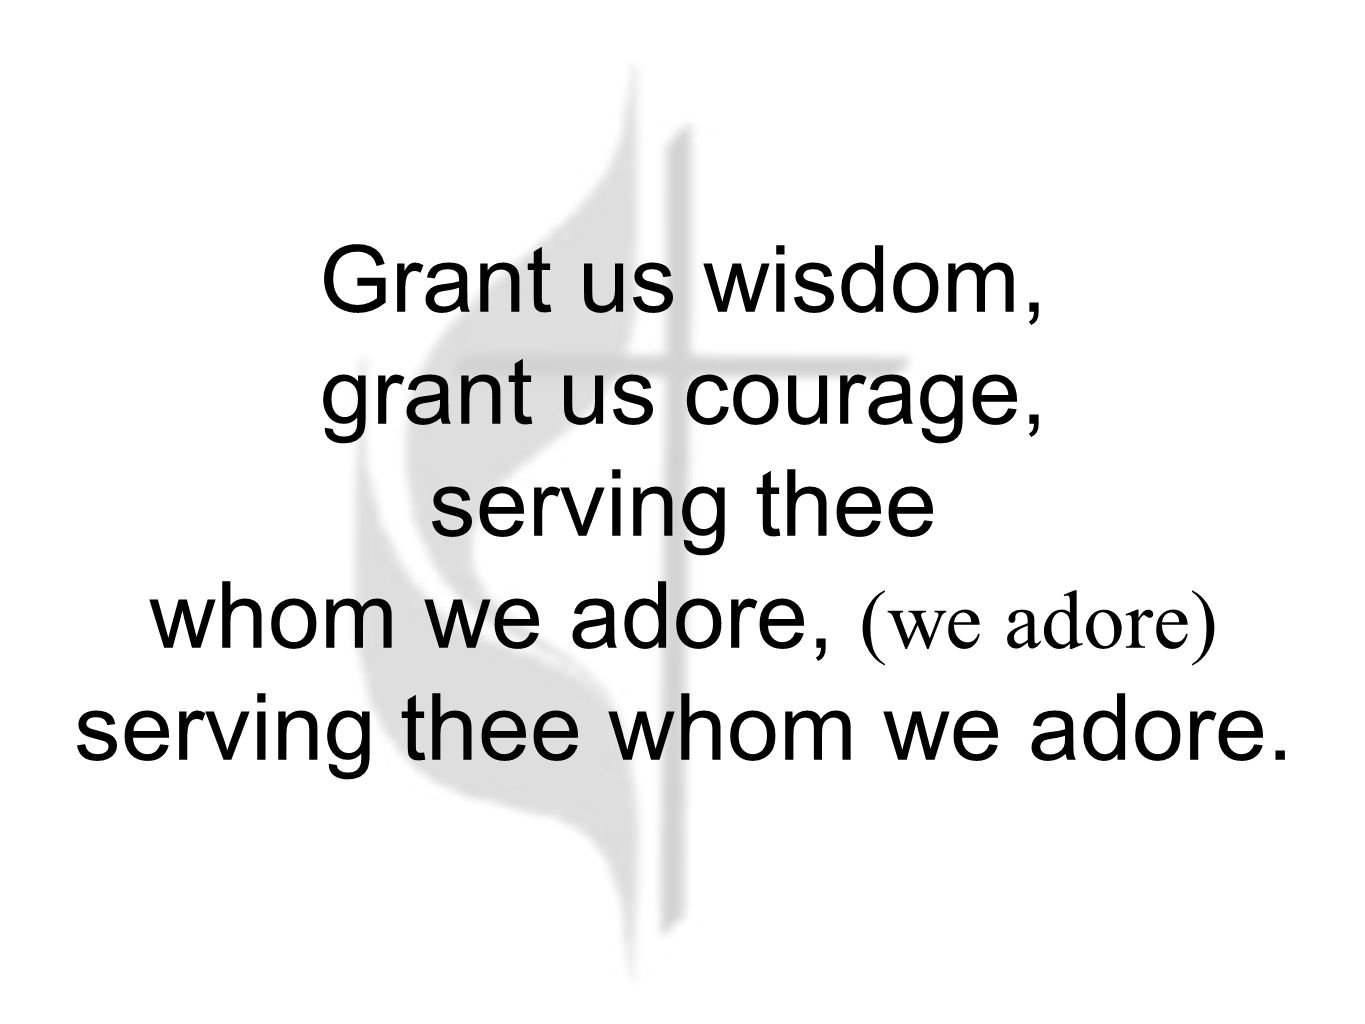 Grant us wisdom, grant us courage, serving thee whom we adore, (we adore) serving thee whom we adore.